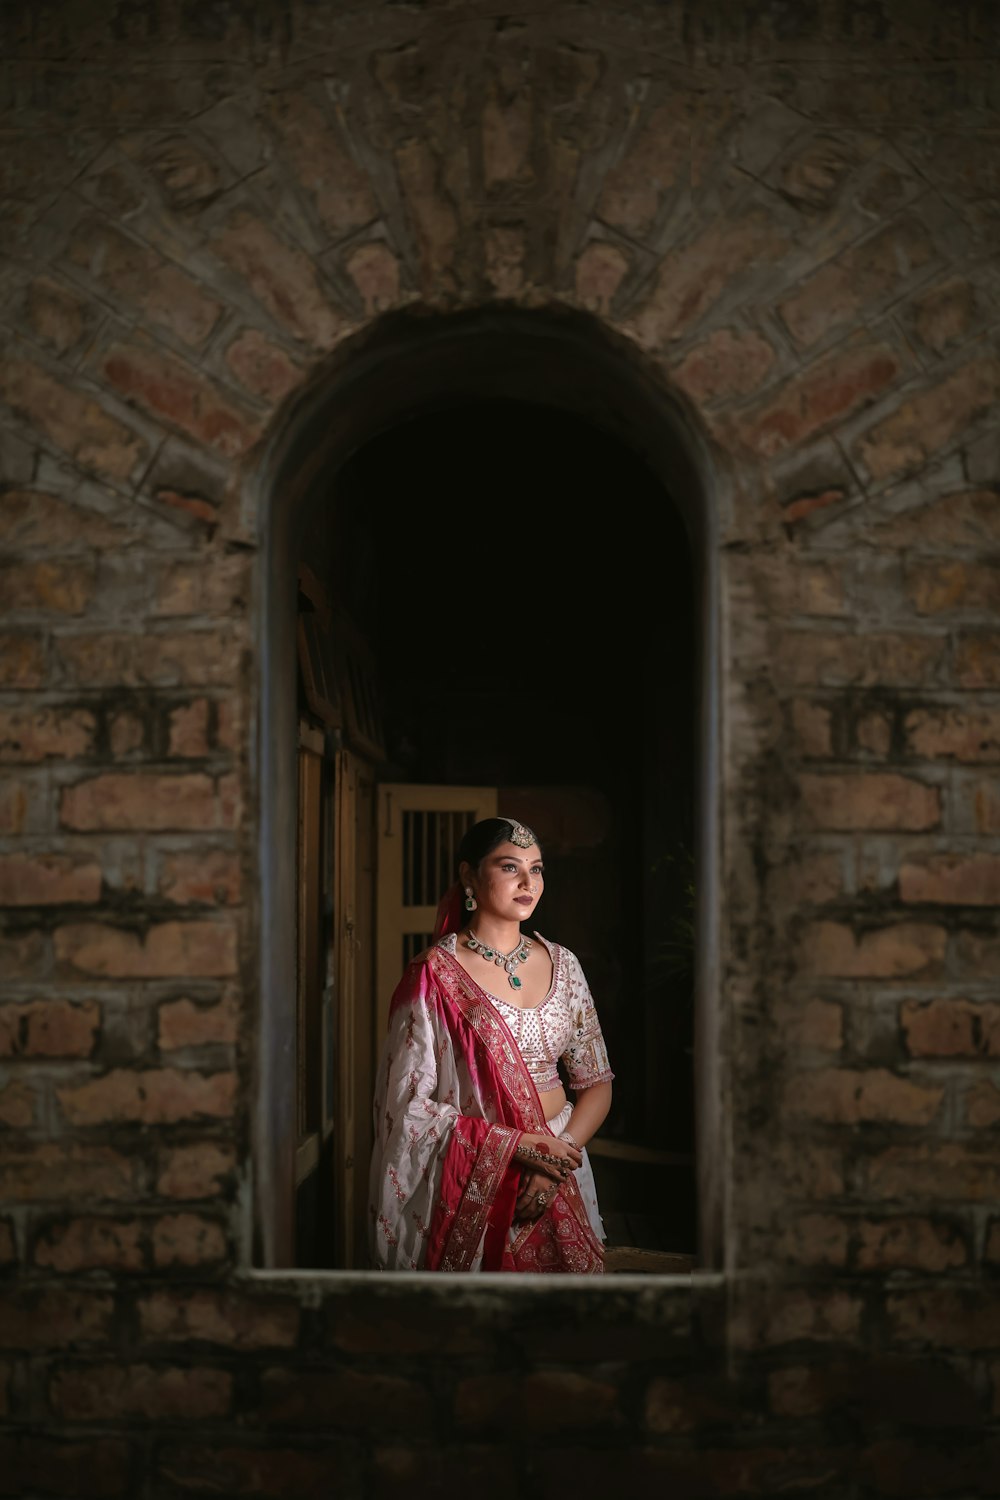 a woman in a red and white sari looking out a window